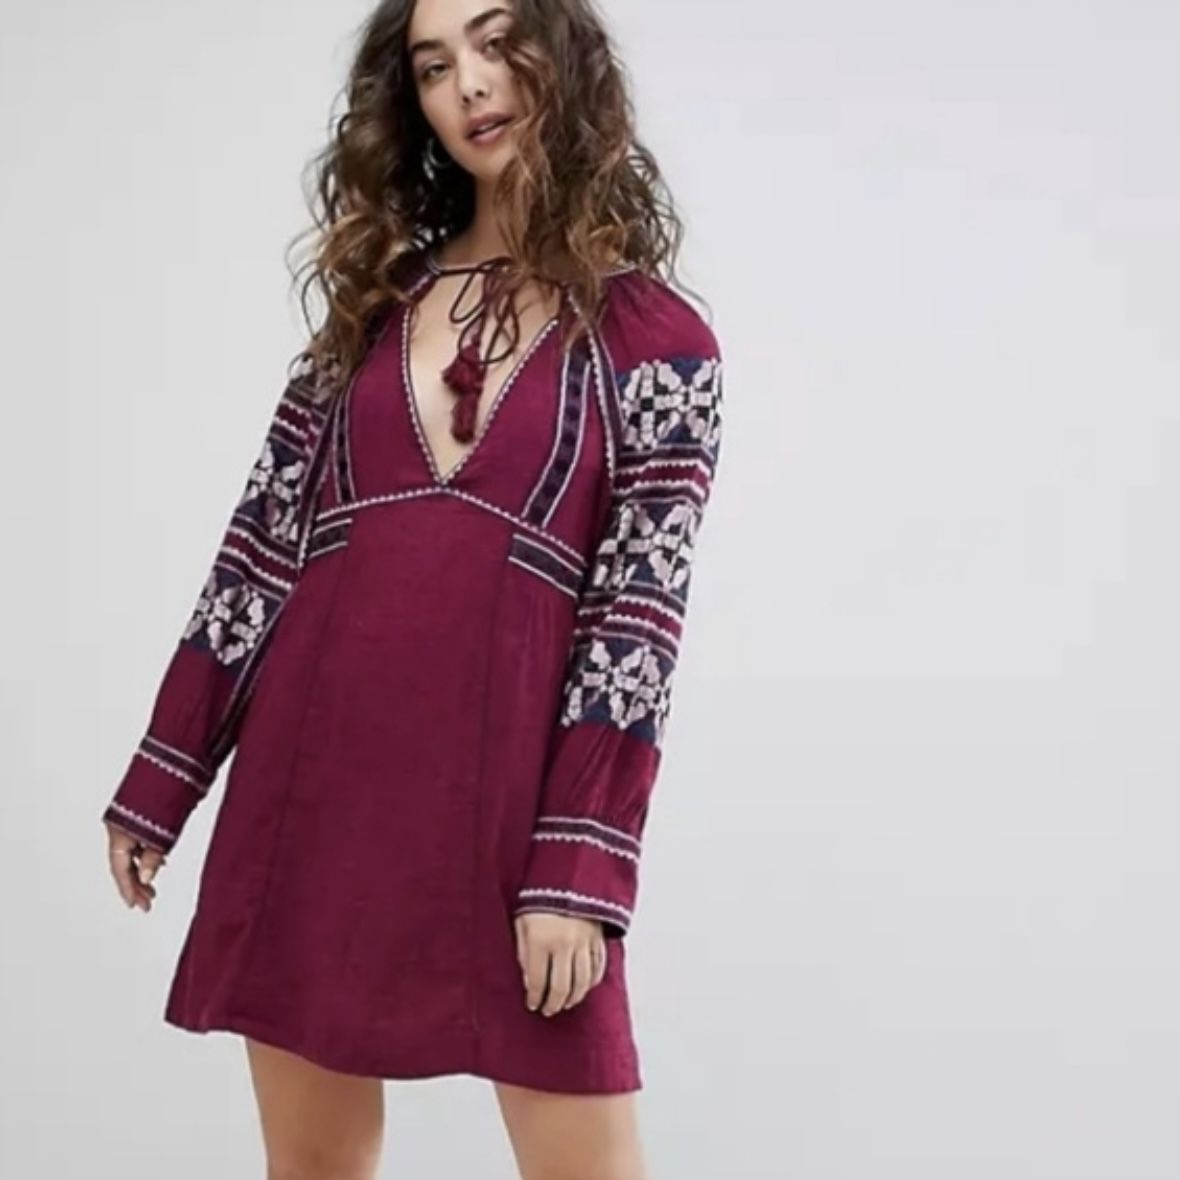 FREE PEOPLE Wine Red Purple Boho All My Life Embroidered Smocked Tunic Dress